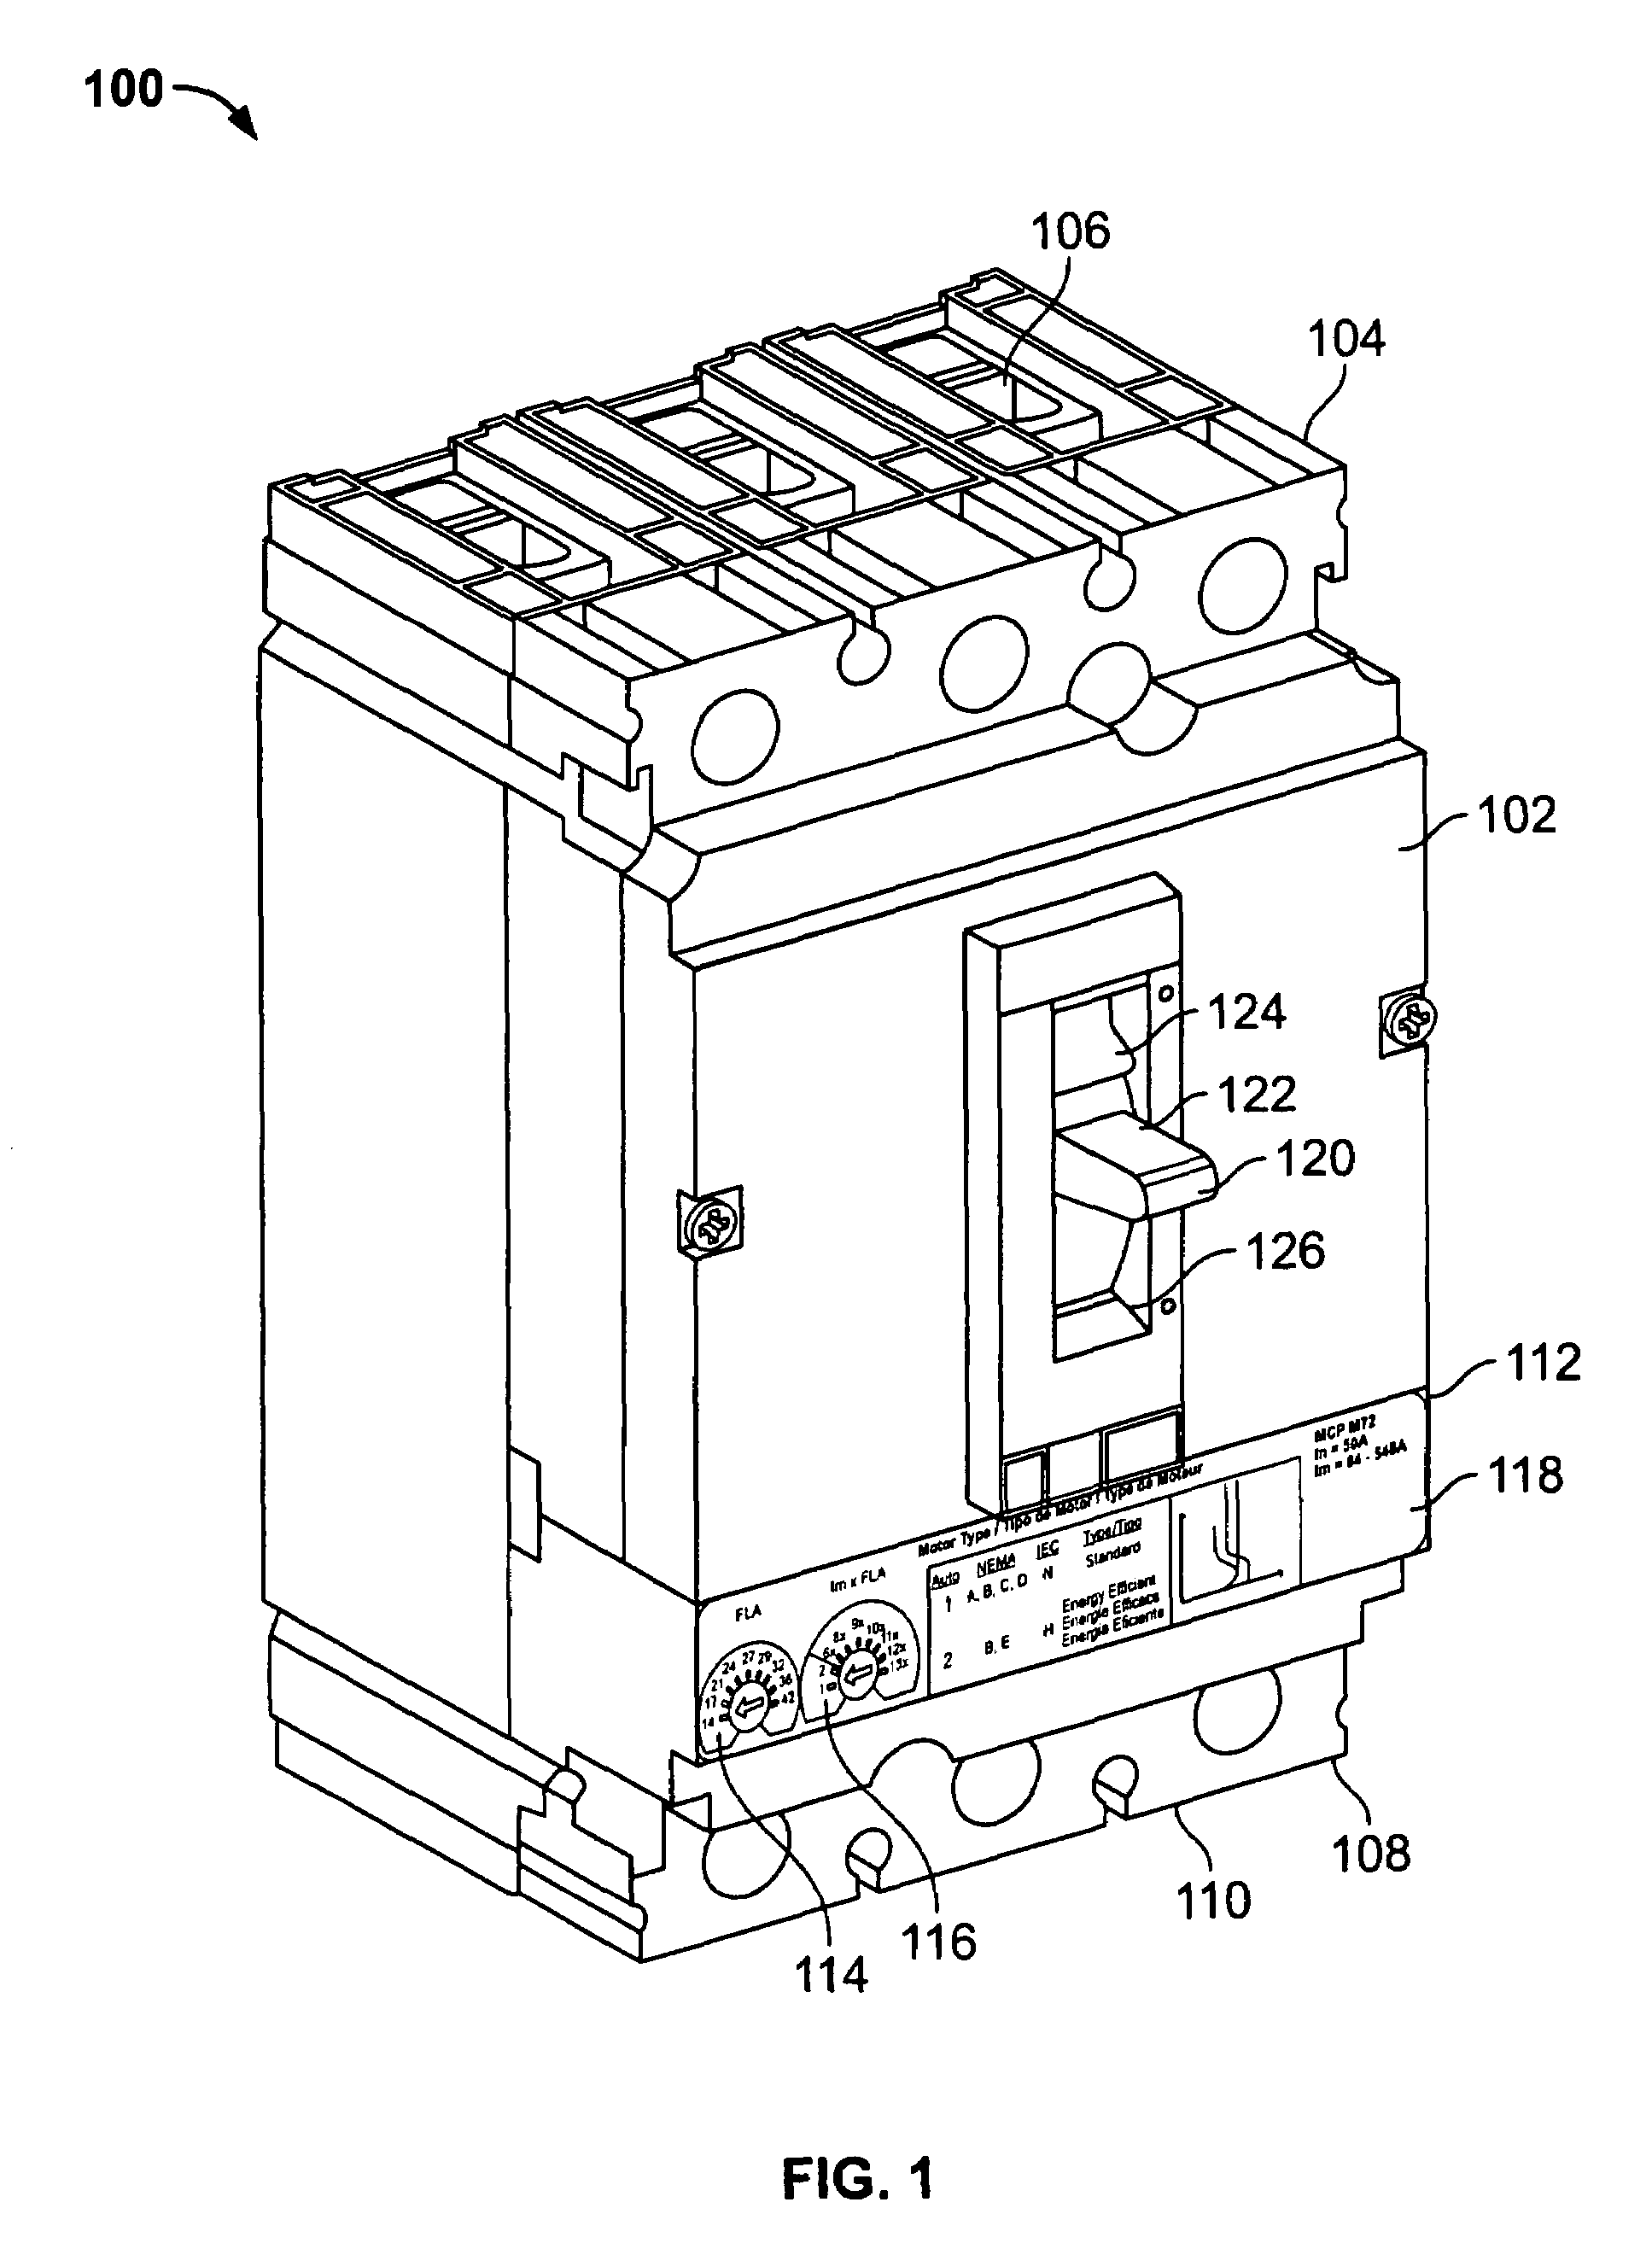 Method and system of fault powered supply voltage regulation